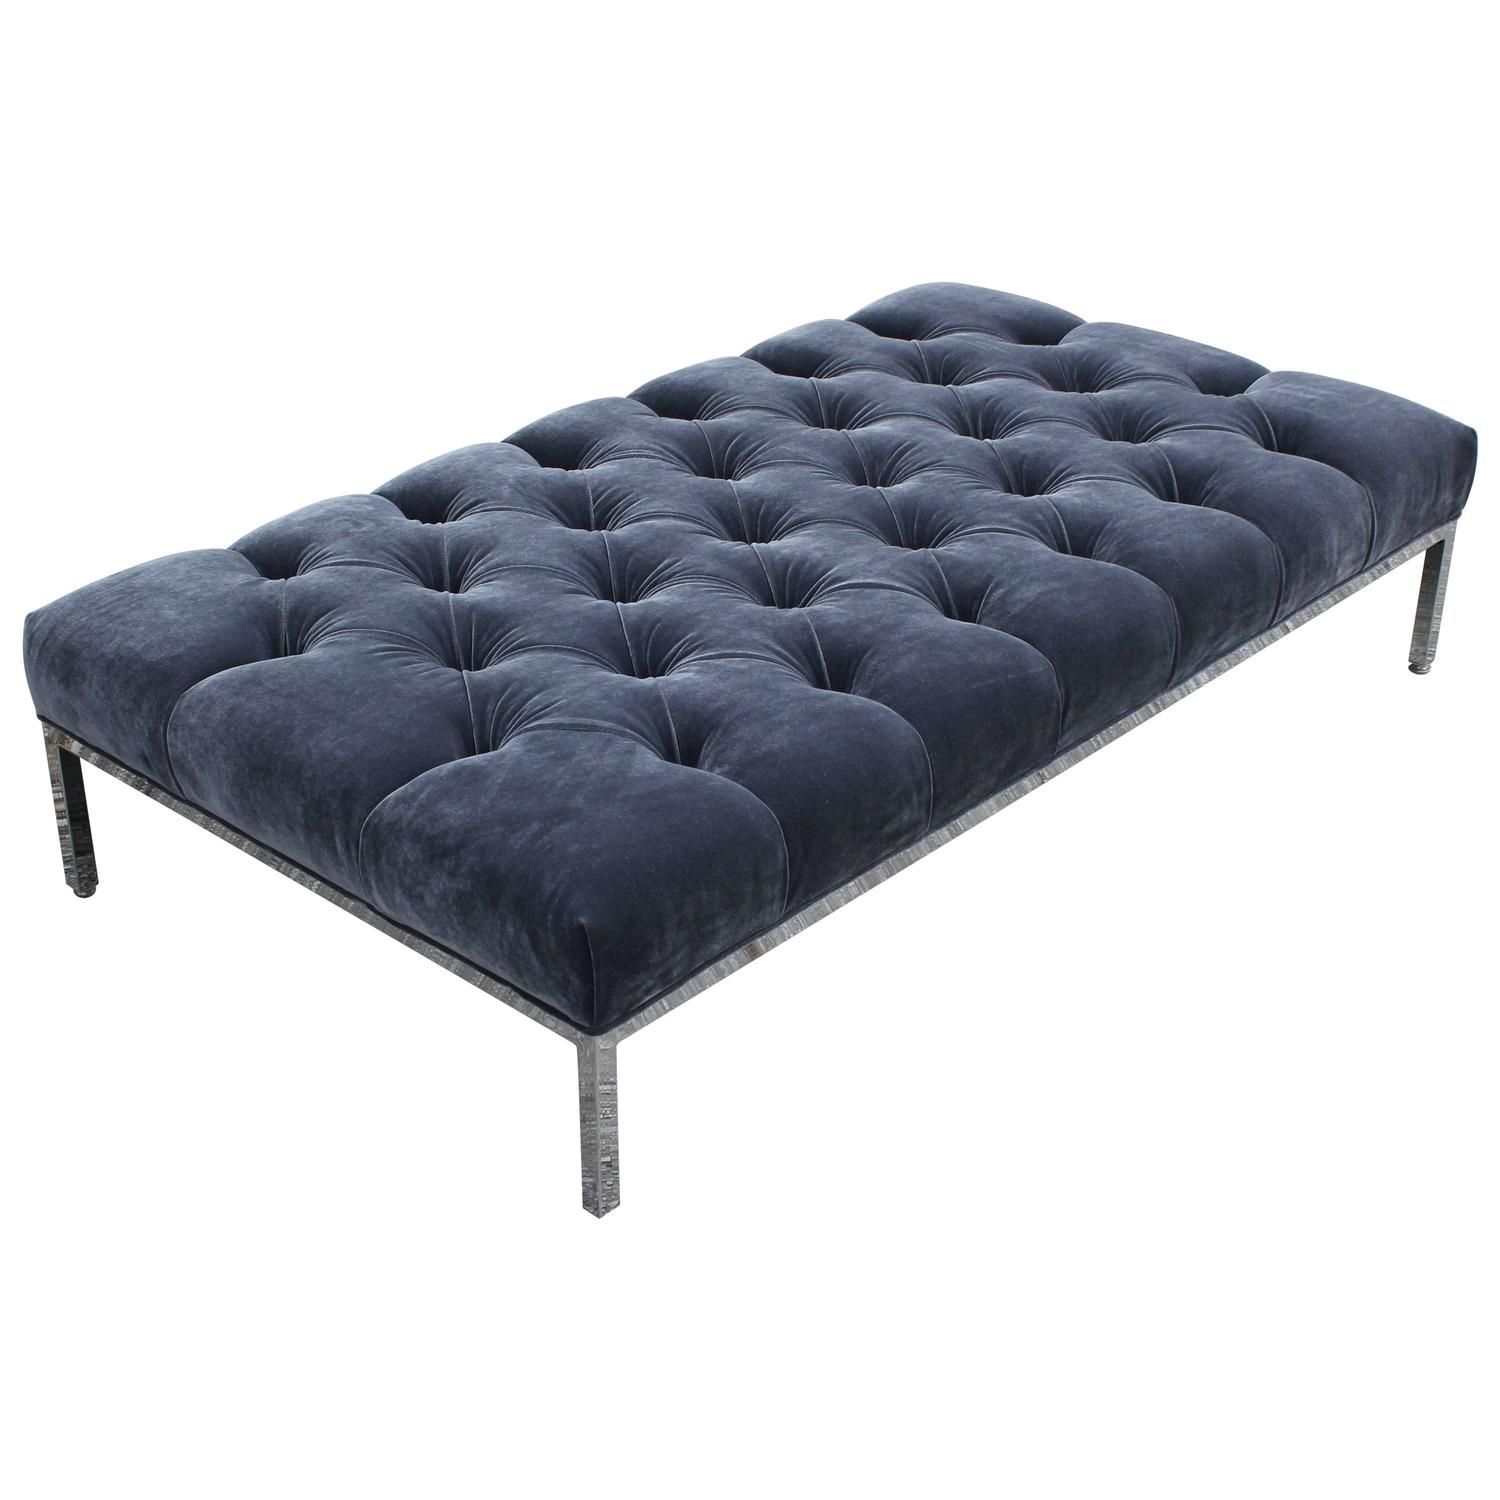 Fabulous Deeply Tufted Grey Velvet Ottoman Bench Or Coffee Table For Throughout Tufted Gray Velvet Ottomans (View 19 of 20)